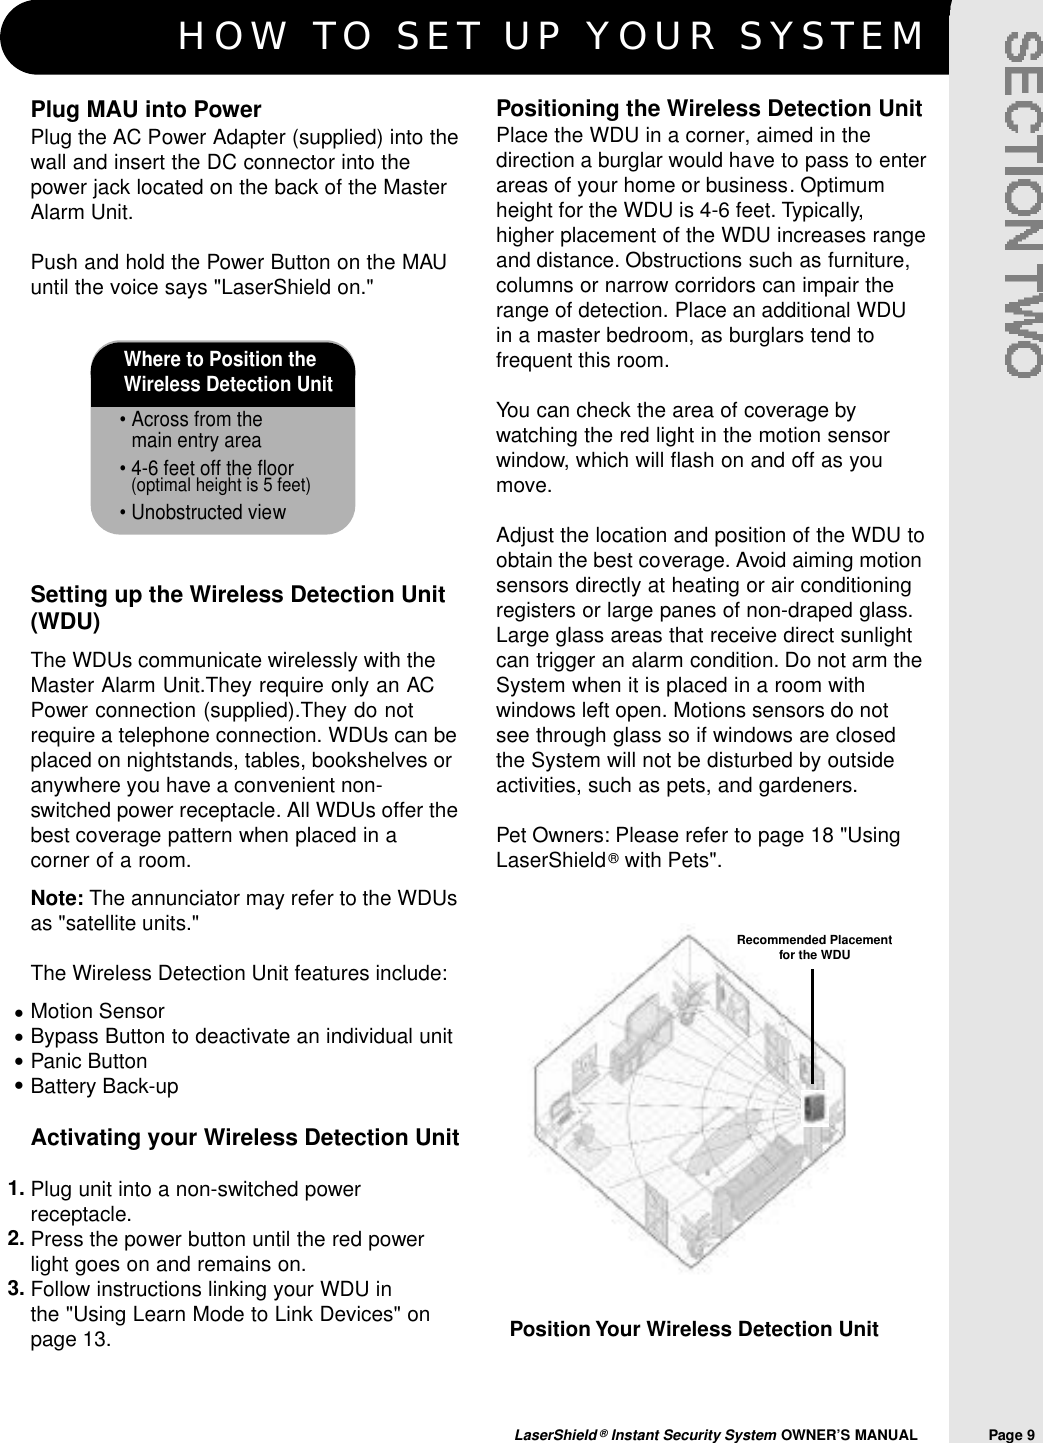 HOW TO SET UP YOUR SYSTEMLaserShield ®Instant Security System OWNER’S MANUAL                Page 9Where to Position the Wireless Detection Unit• Across from the main entry area• 4-6 feet off the floor(optimal height is 5 feet)• Unobstructed viewPosition Your Wireless Detection UnitPositioning the Wireless Detection UnitPlace the WDU in a corner, aimed in thedirection a burglar would have to pass to enterareas of your home or business. Optimumheight for the WDU is 4-6 feet. Typically,higher placement of the WDU increases rangeand distance. Obstructions such as furniture,columns or narrow corridors can impair therange of detection. Place an additional WDUin a master bedroom, as burglars tend tofrequent this room.You can check the area of coverage bywatching the red light in the motion sensorwindow, which will flash on and off as youmove.Adjust the location and position of the WDU toobtain the best coverage. Avoid aiming motionsensors directly at heating or air conditioningregisters or large panes of non-draped glass.Large glass areas that receive direct sunlightcan trigger an alarm condition. Do not arm theSystem when it is placed in a room withwindows left open. Motions sensors do notsee through glass so if windows are closedthe System will not be disturbed by outsideactivities, such as pets, and gardeners.Pet Owners: Please refer to page 18 &quot;UsingLaserShield®with Pets&quot;.Plug MAU into PowerPlug the AC Power Adapter (supplied) into thewall and insert the DC connector into thepower jack located on the back of the MasterAlarm Unit.Push and hold the Power Button on the MAUuntil the voice says &quot;LaserShield on.&quot; Setting up the Wireless Detection Unit(WDU)The WDUs communicate wirelessly with theMaster Alarm Unit.They require only an ACPower connection (supplied).They do notrequire a telephone connection. WDUs can beplaced on nightstands, tables, bookshelves oranywhere you have a convenient non-switched power receptacle. All WDUs offer thebest coverage pattern when placed in acorner of a room.Note: The annunciator may refer to the WDUsas &quot;satellite units.&quot;The Wireless Detection Unit features include:Motion SensorBypass Button to deactivate an individual unitPanic ButtonBattery Back-upActivating your Wireless Detection UnitPlug unit into a non-switched powerreceptacle.Press the power button until the red powerlight goes on and remains on.Follow instructions linking your WDU in the &quot;Using Learn Mode to Link Devices&quot; onpage 13.••••1.2.3.Recommended Placement for the WDU